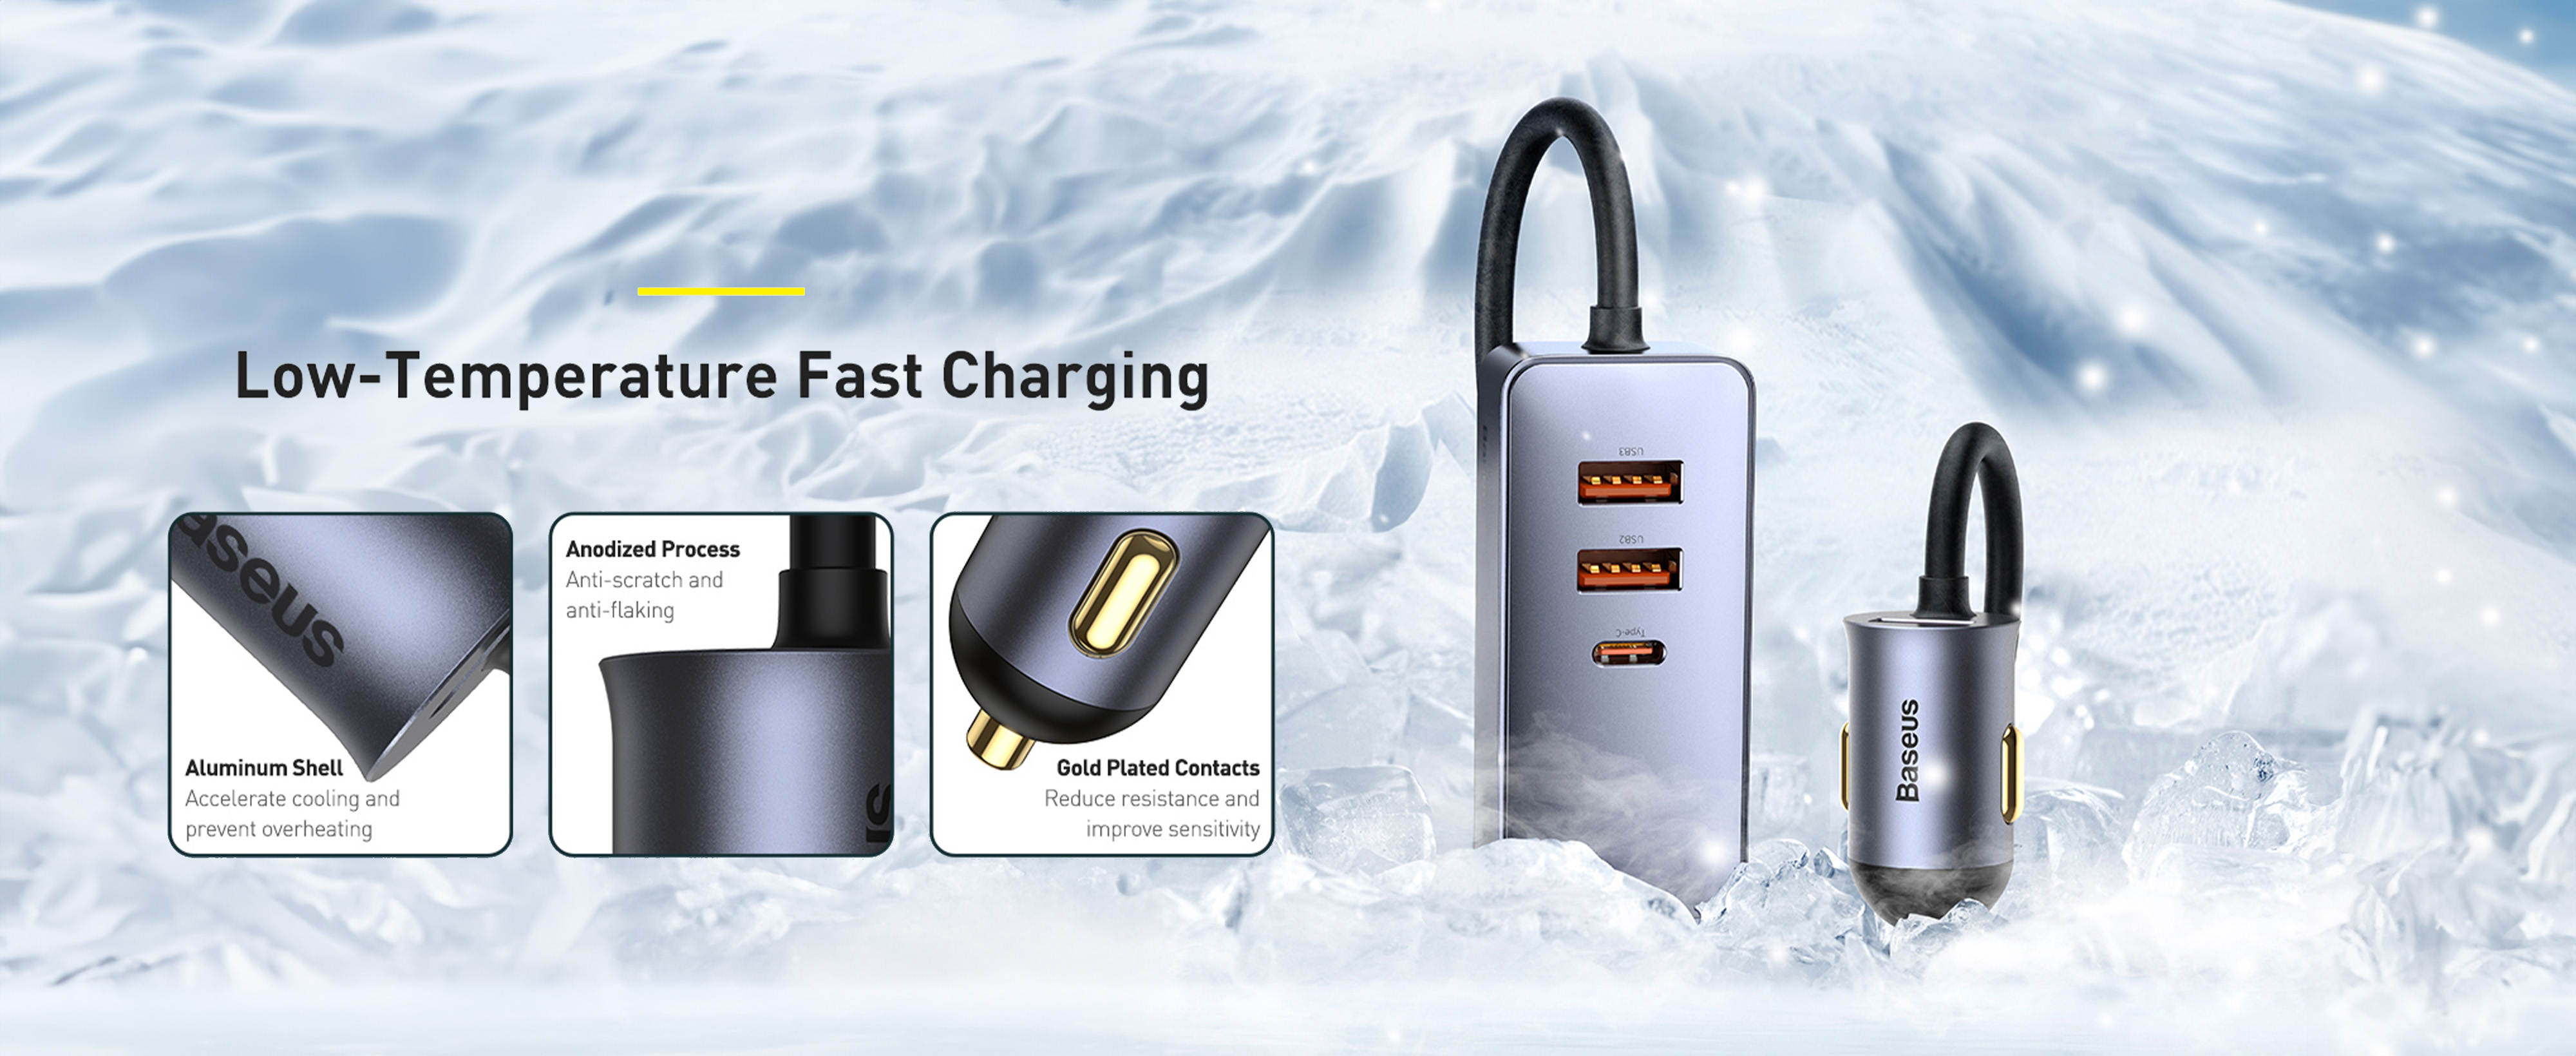 Baseus 120w Multi USB Car Charger QC3.0 & PD 3.0 30w x 4 Ports Fast Car Charger USB C For Phones/Tablets/Switch, 5ft Cable for Back Seat Charging